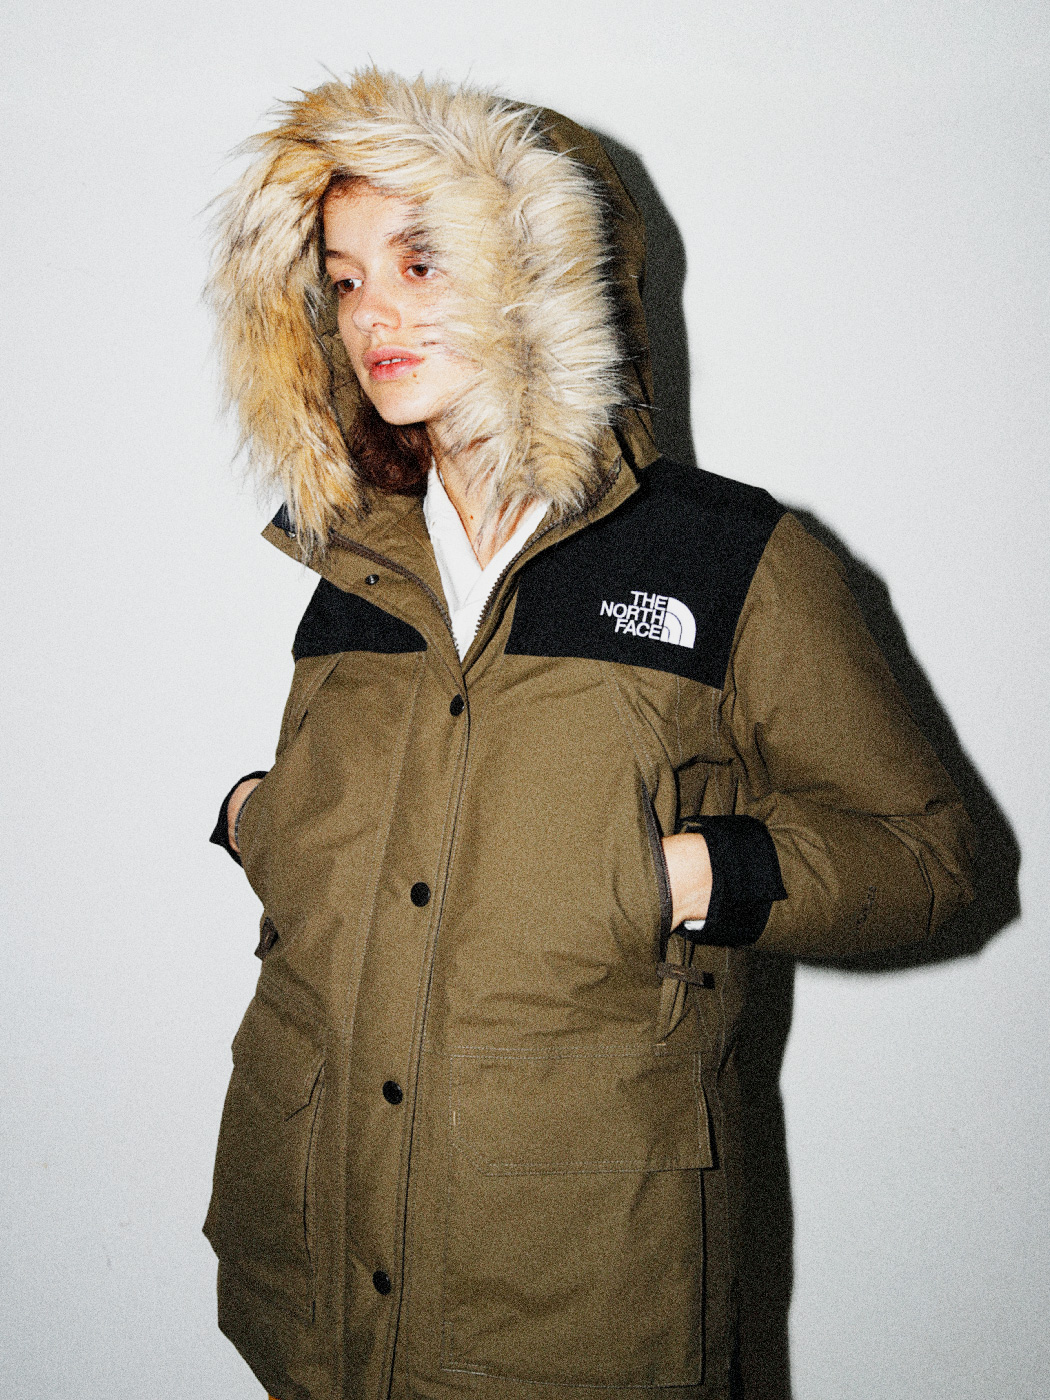 +Add Warmth THE NORTH FACE WOMEN'S 2018 FALL & WINTER | THE NORTH FACE